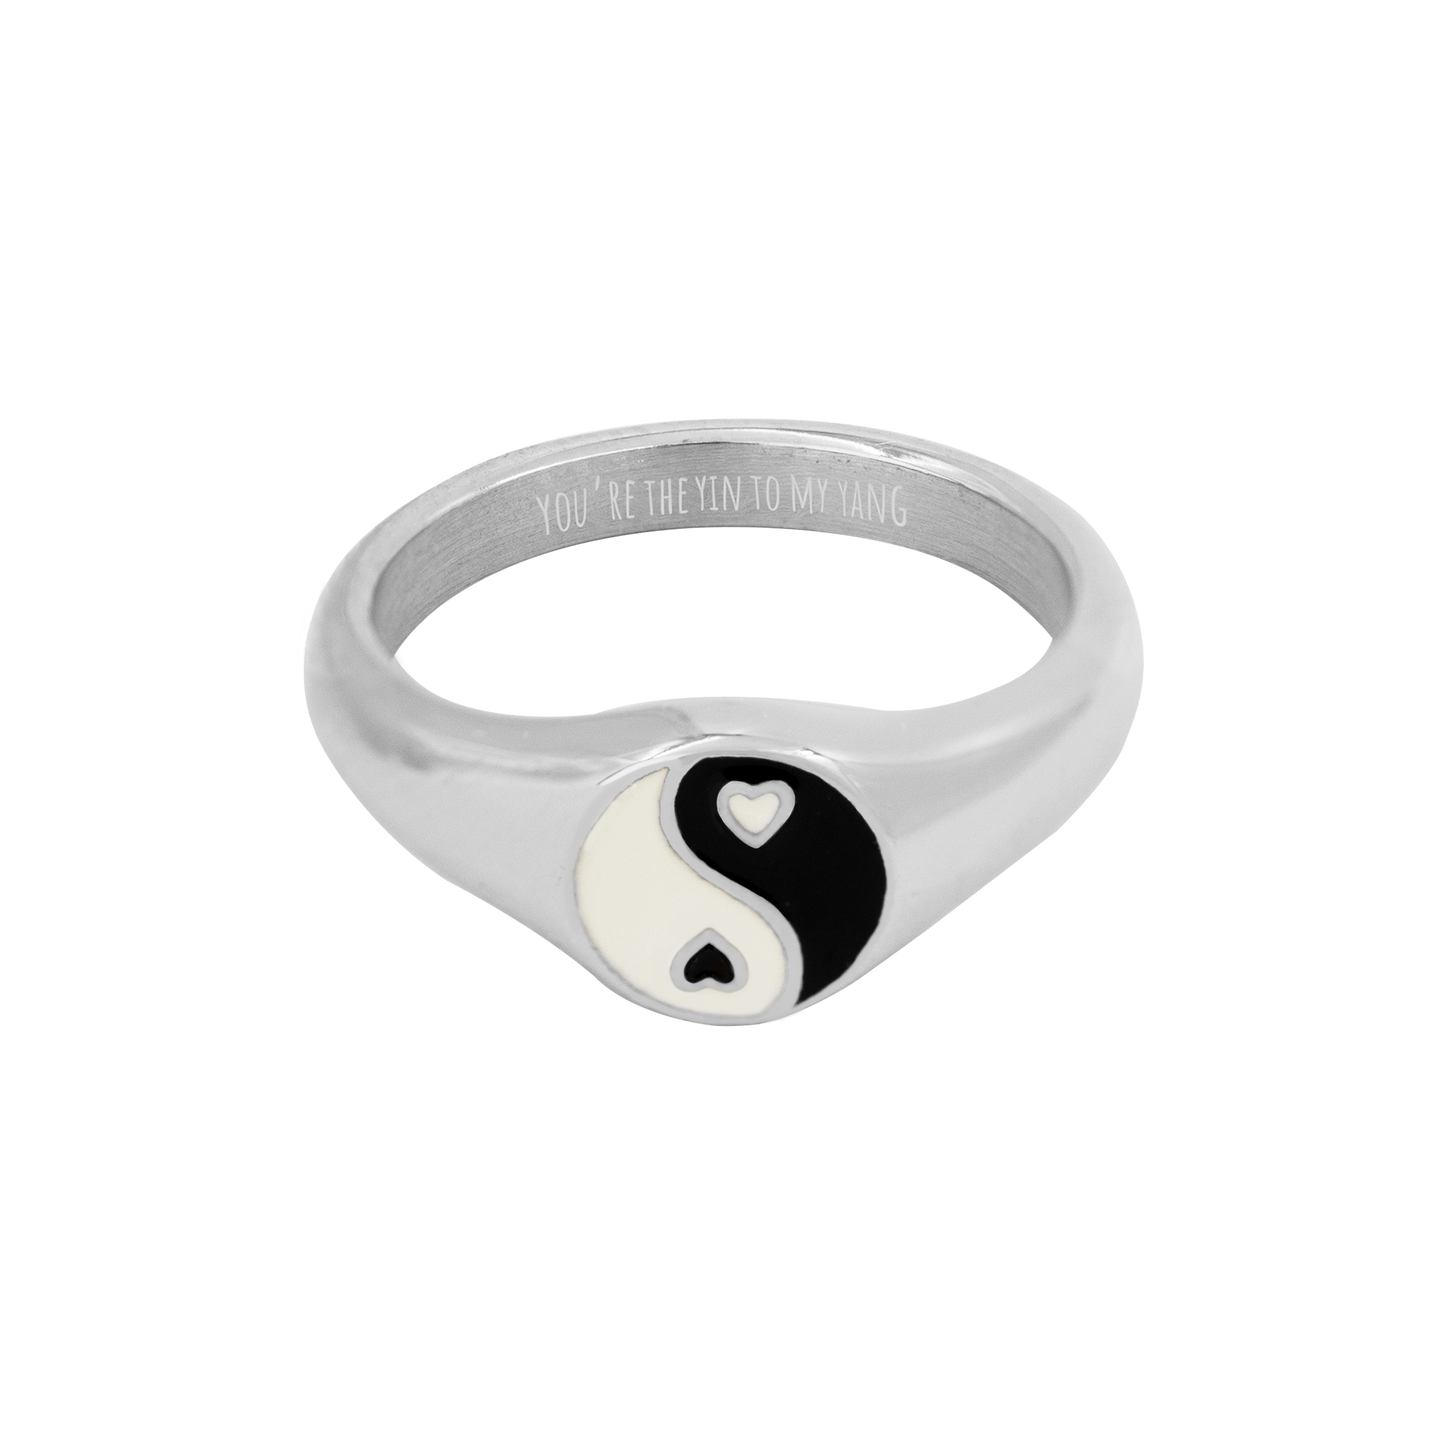 THE YIN TO MY YANG Ring Silber